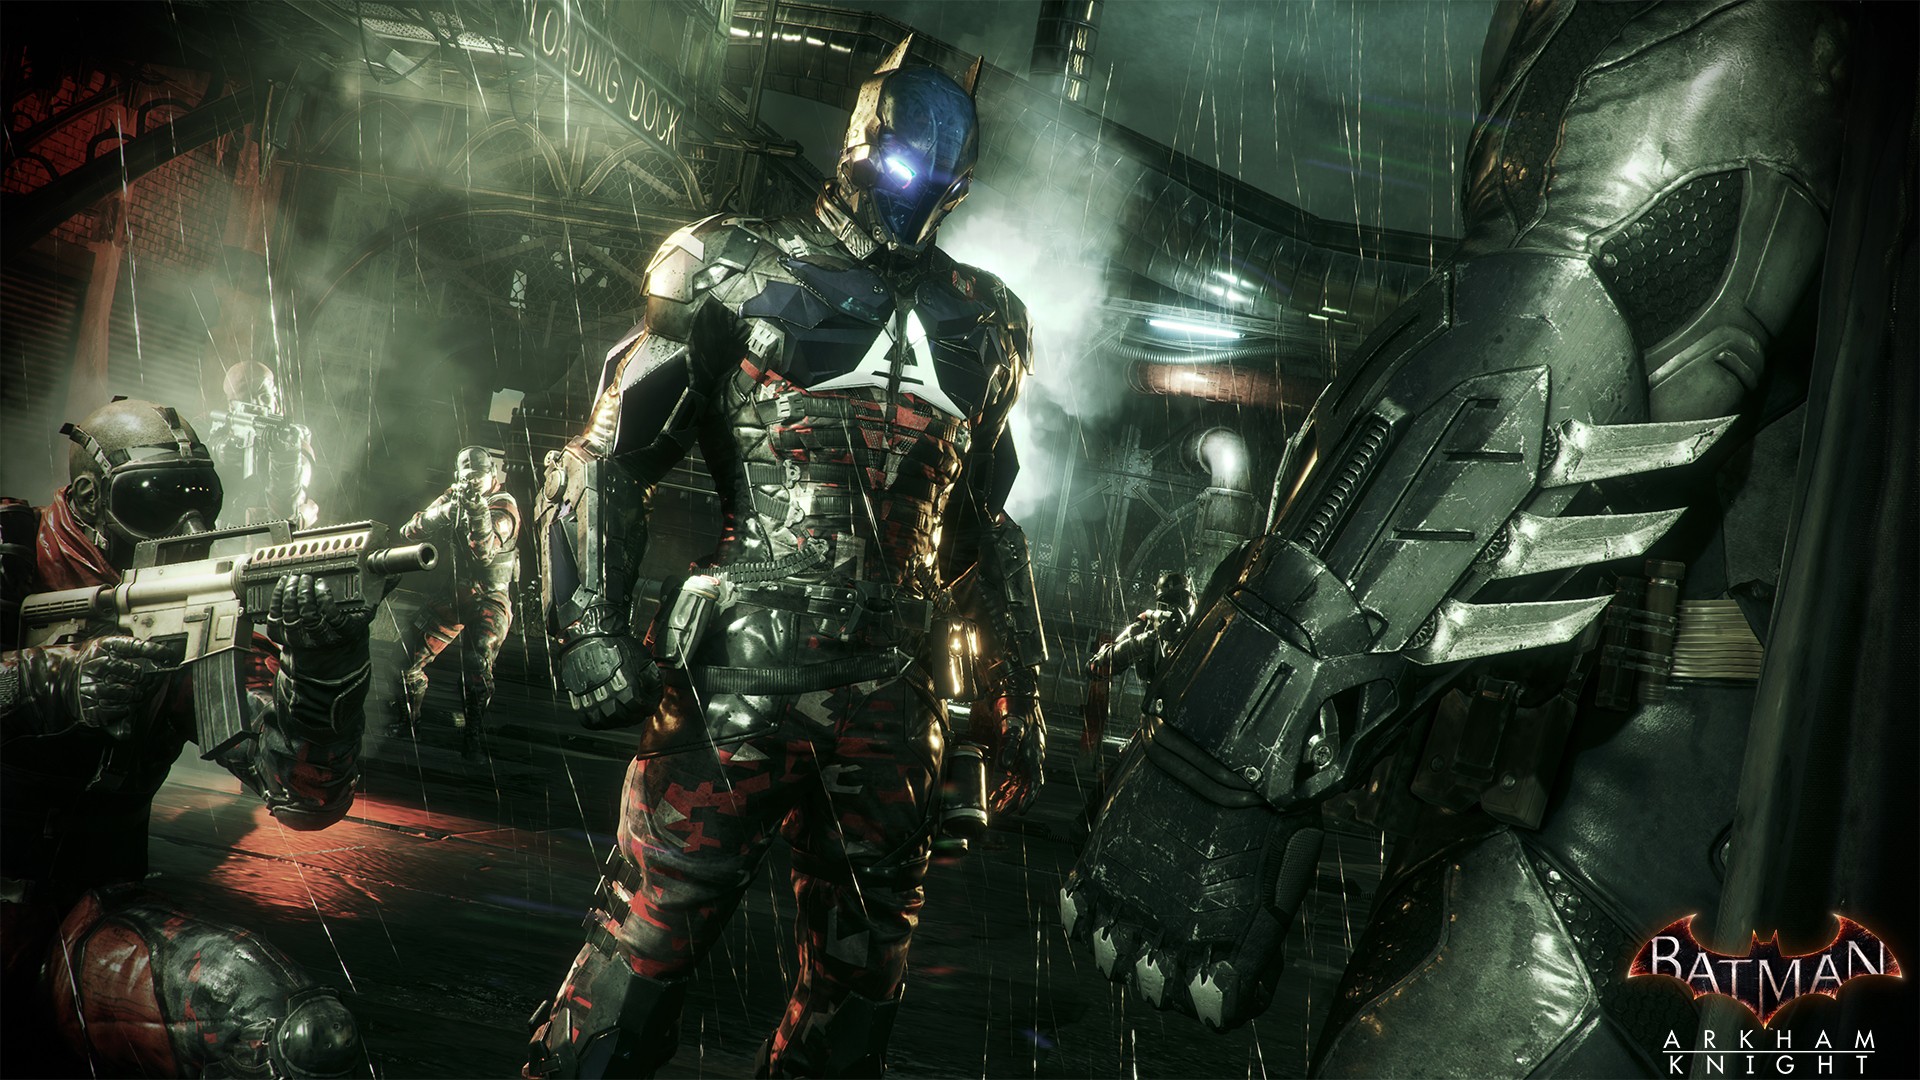 Could the Arkham Knight be the Red Hood?